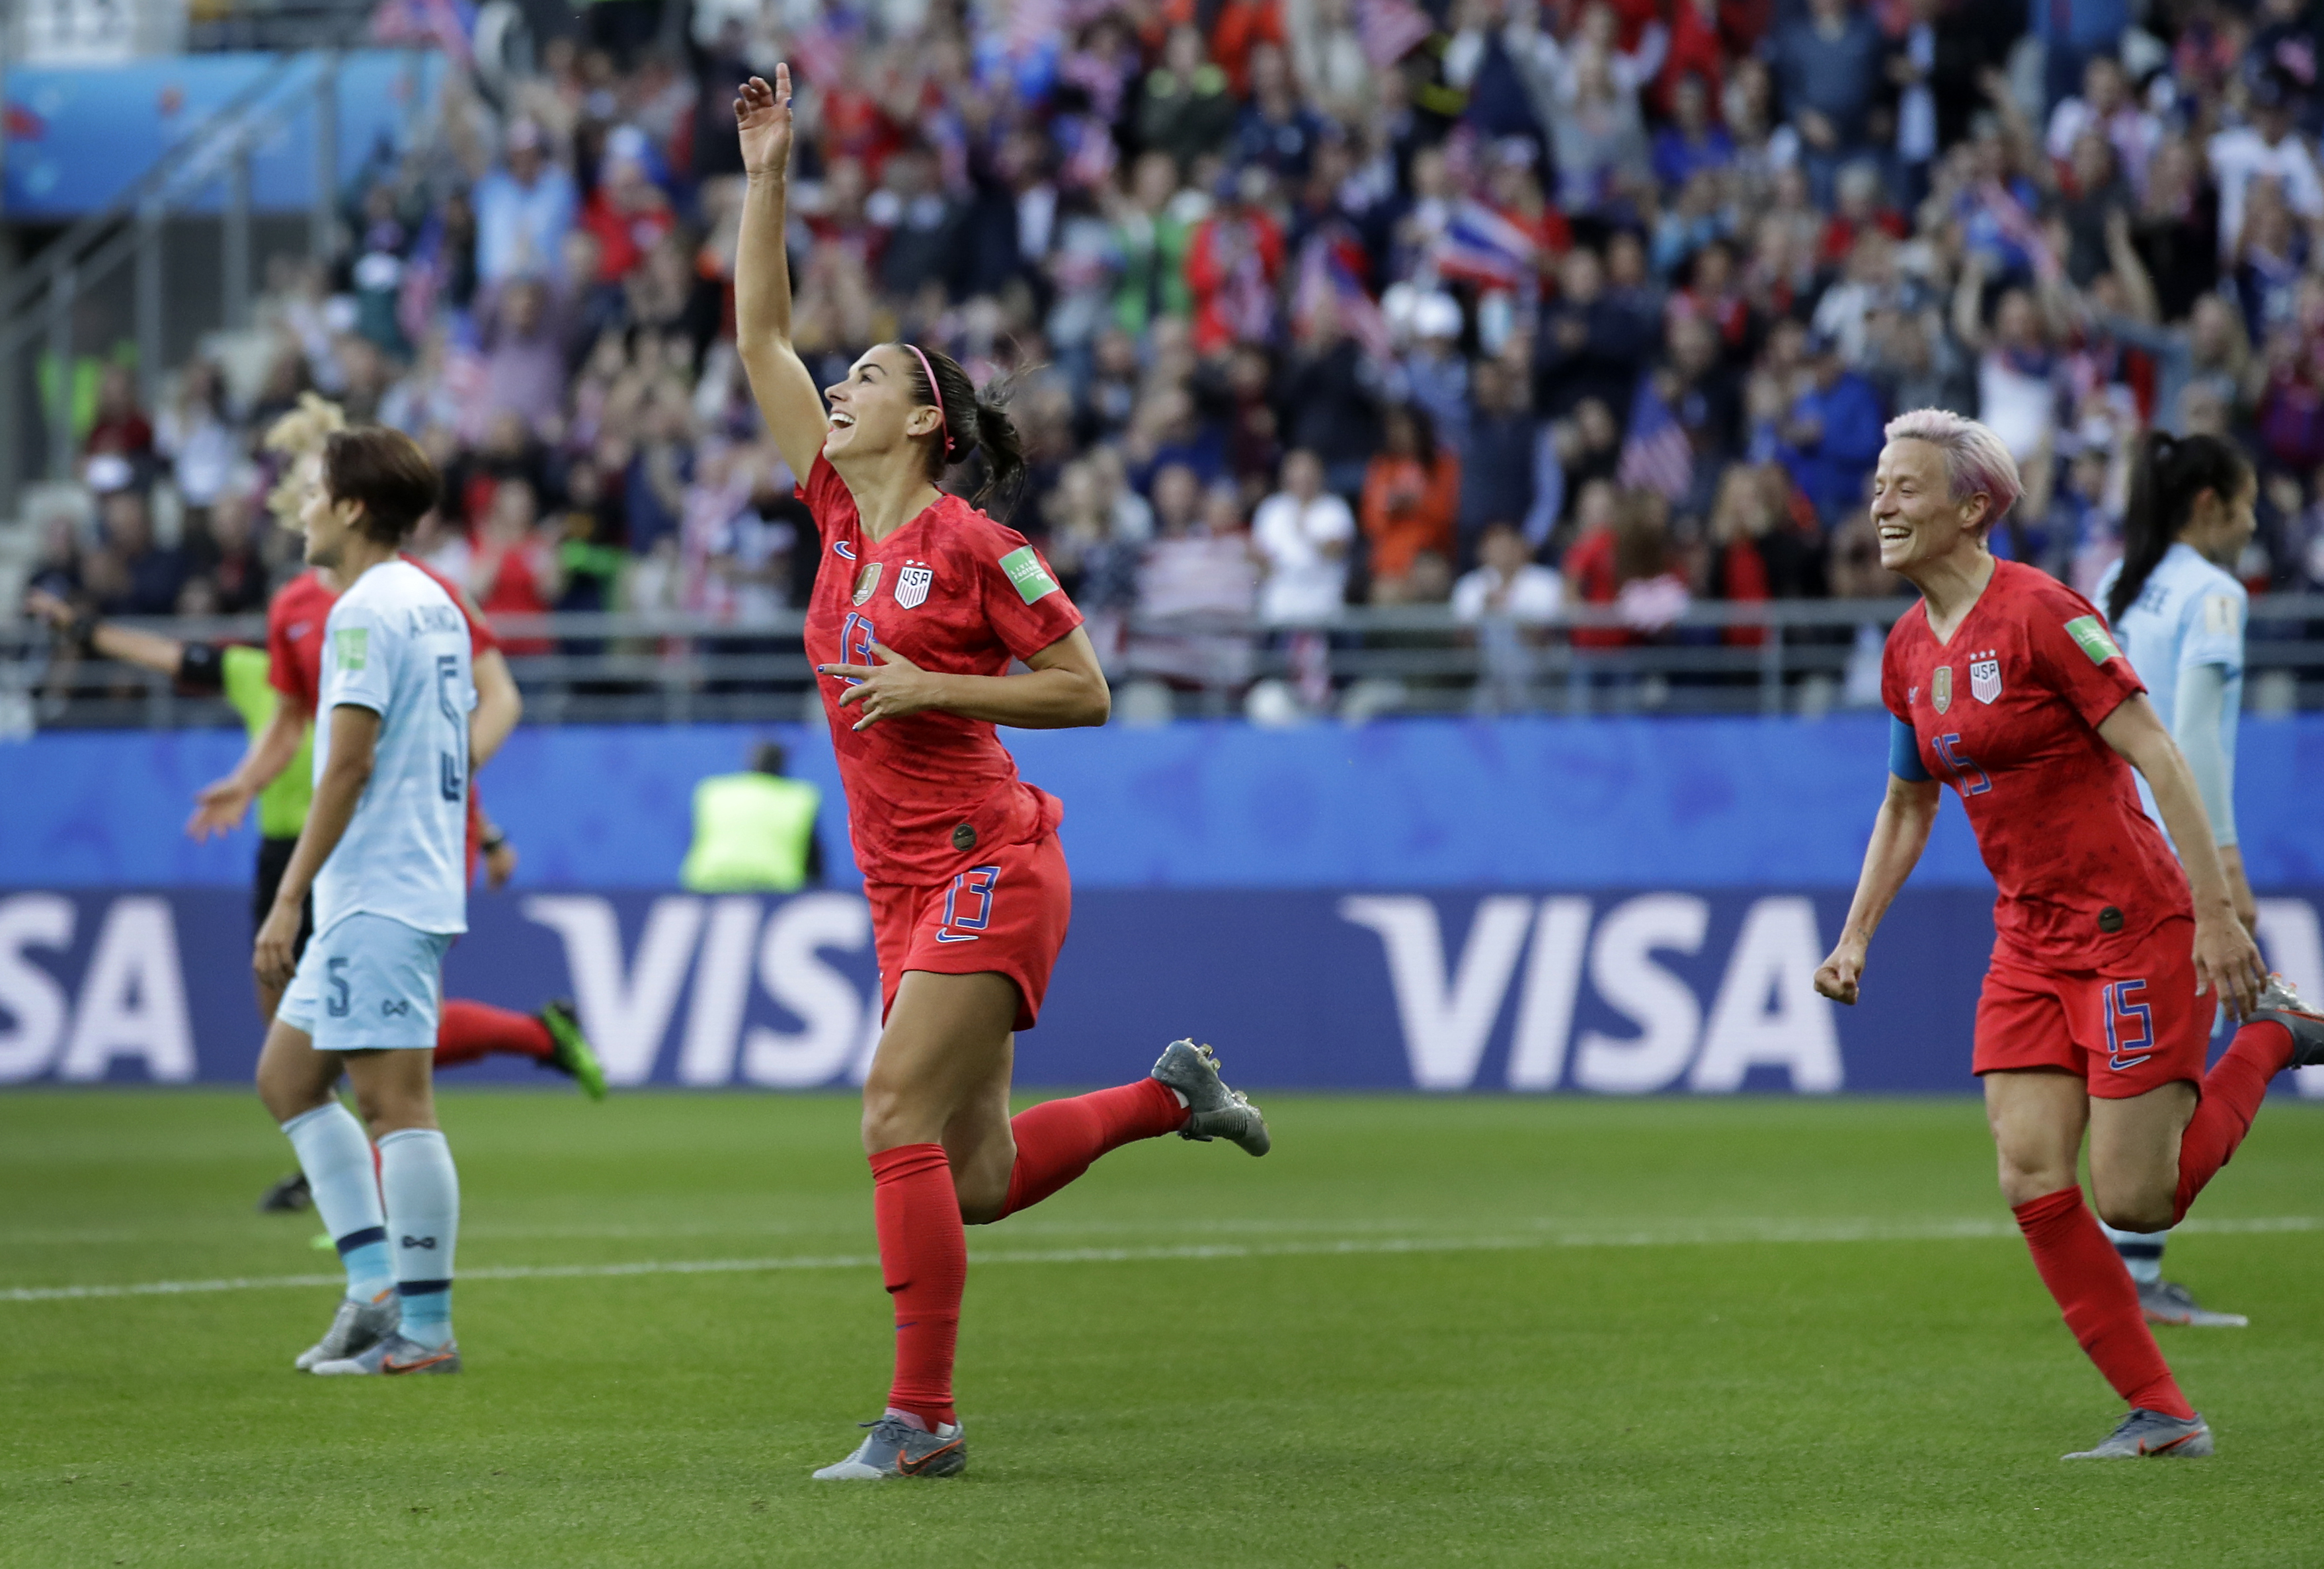 Alex Morgan has 5 goals as US routs Thailand 13-0 - The Daily Universe